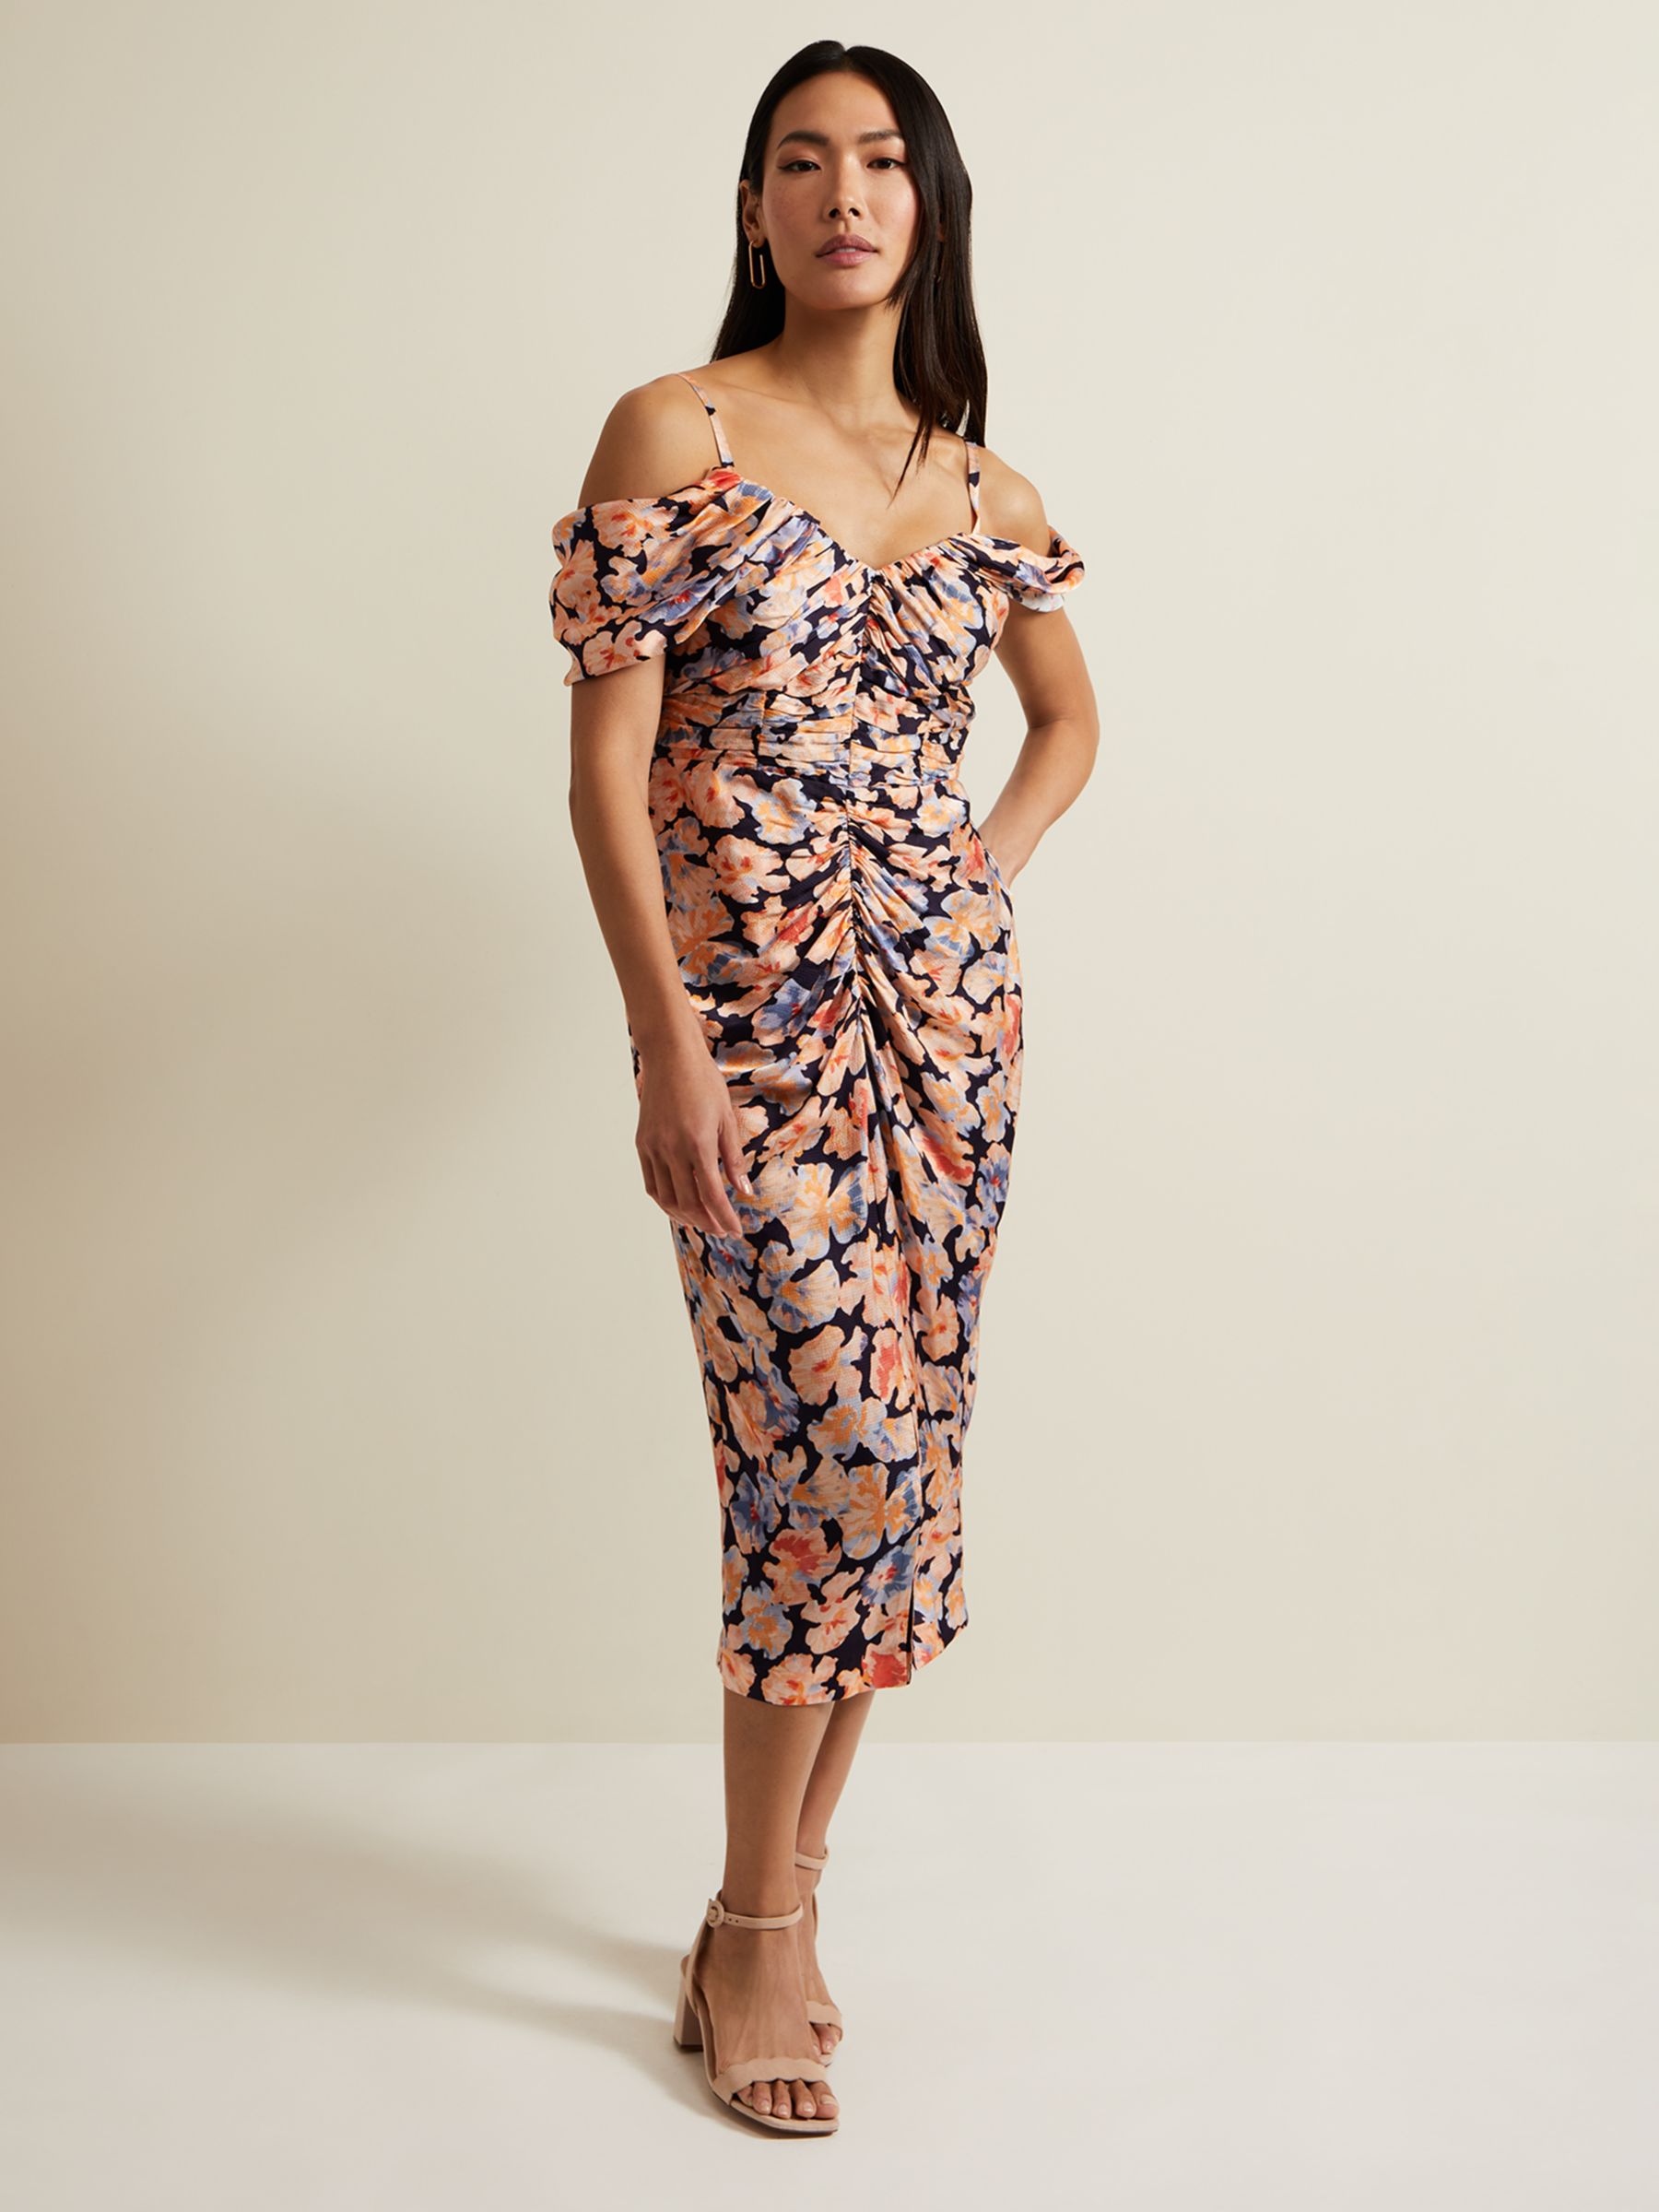 Phase Eight Prudence Floral Print Ruched Midi Dress, Multi, 16